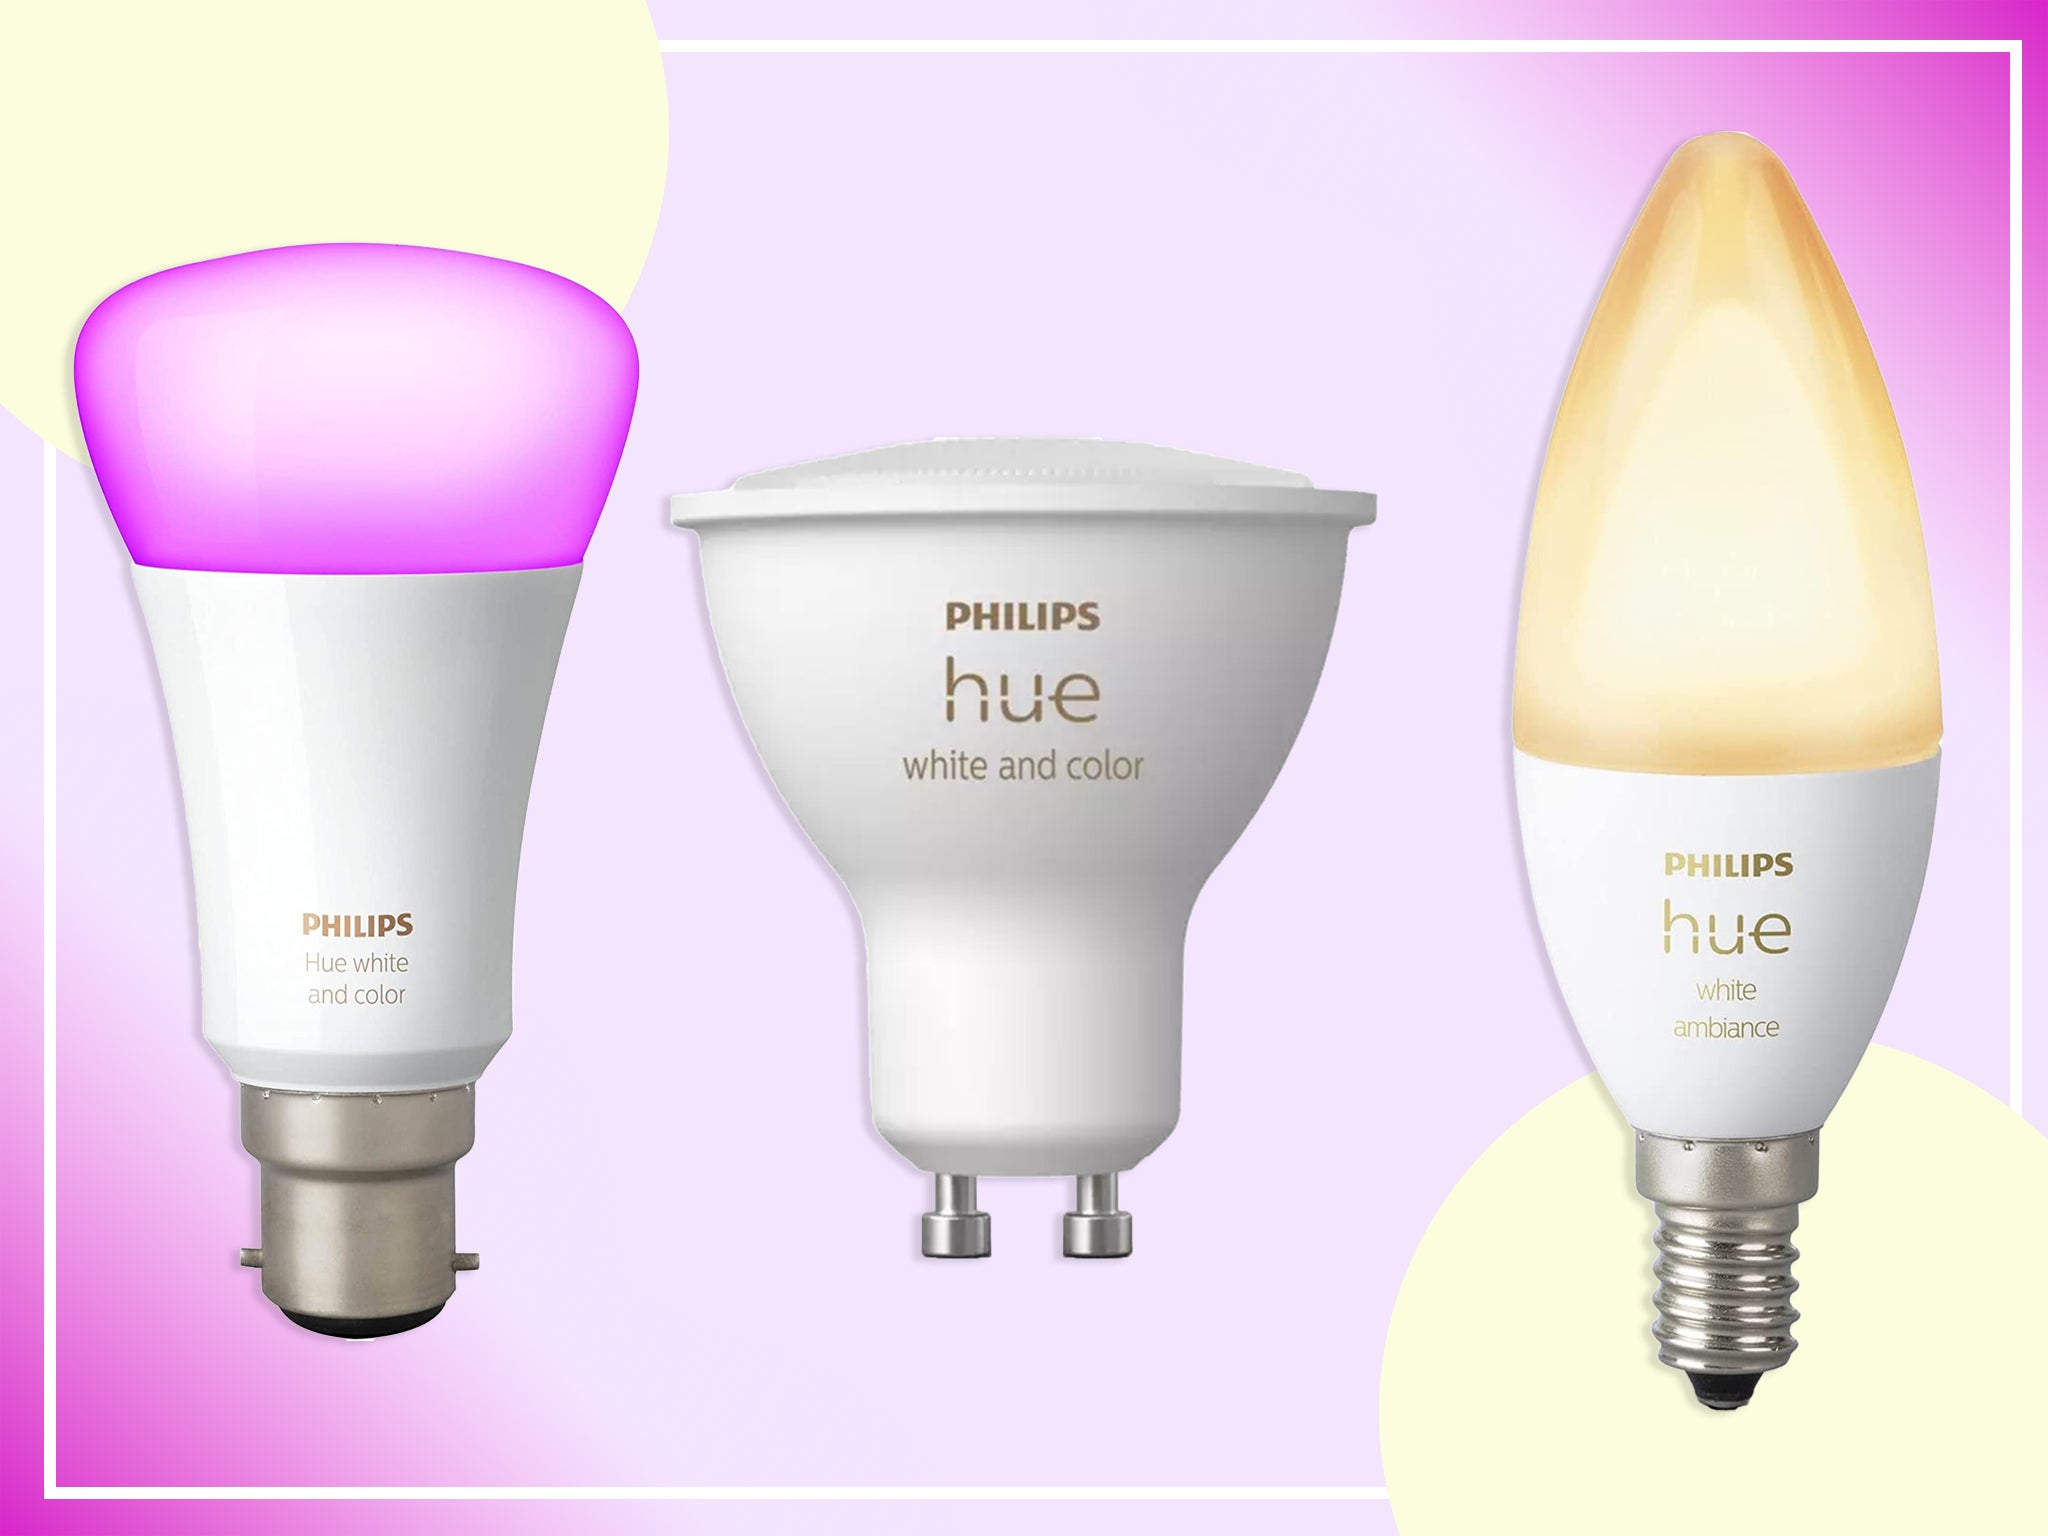 Philips Hue smart bulb discounts: How to save up to £95 at John Lewis | Independent